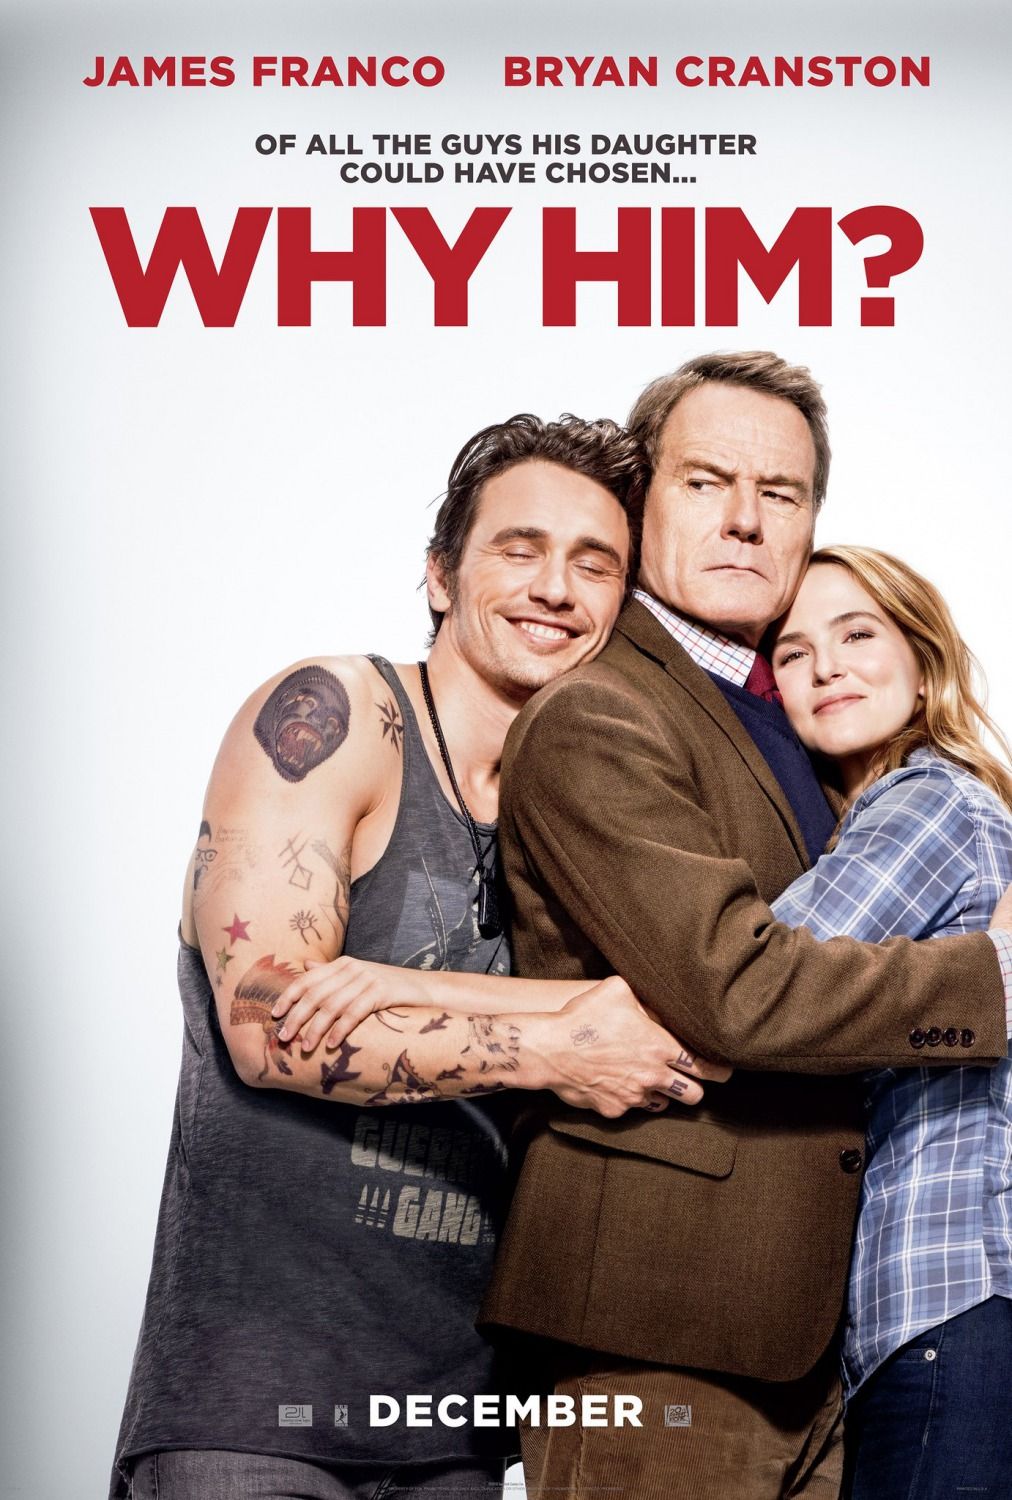 Why Him movie poster HD